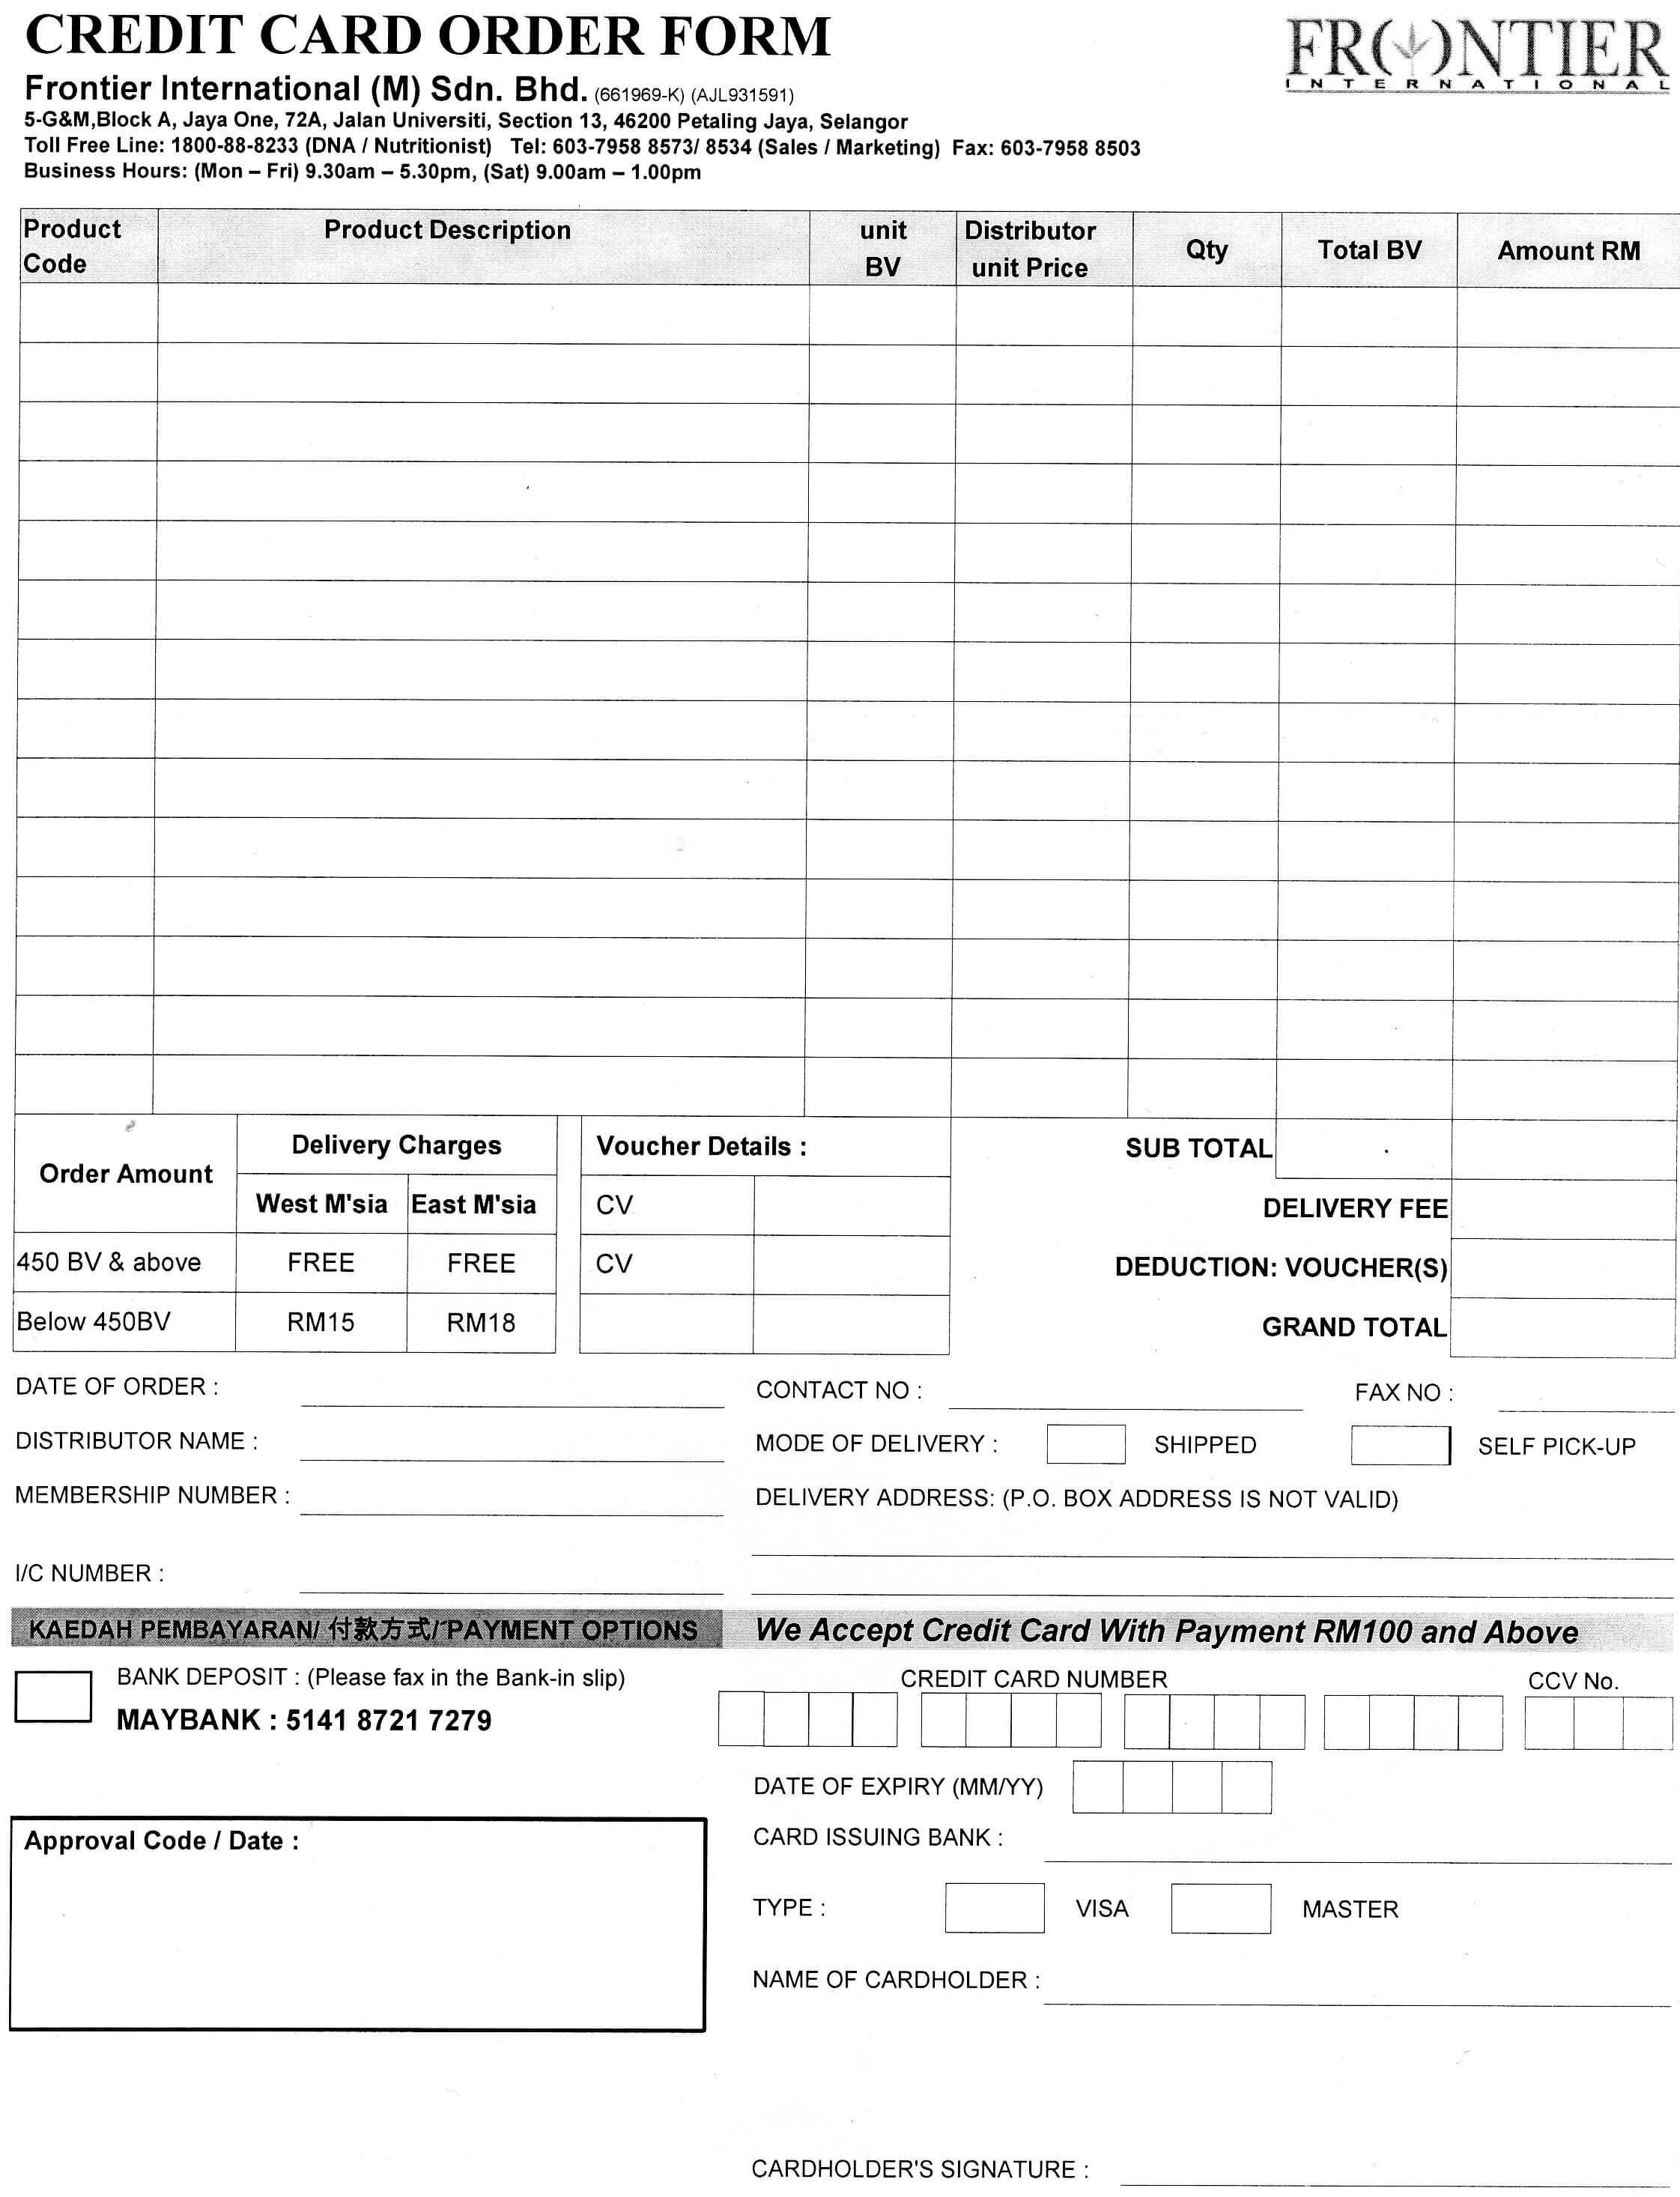 Credit Card Order Form | June Chan's Frontier Network With Order Form With Credit Card Template